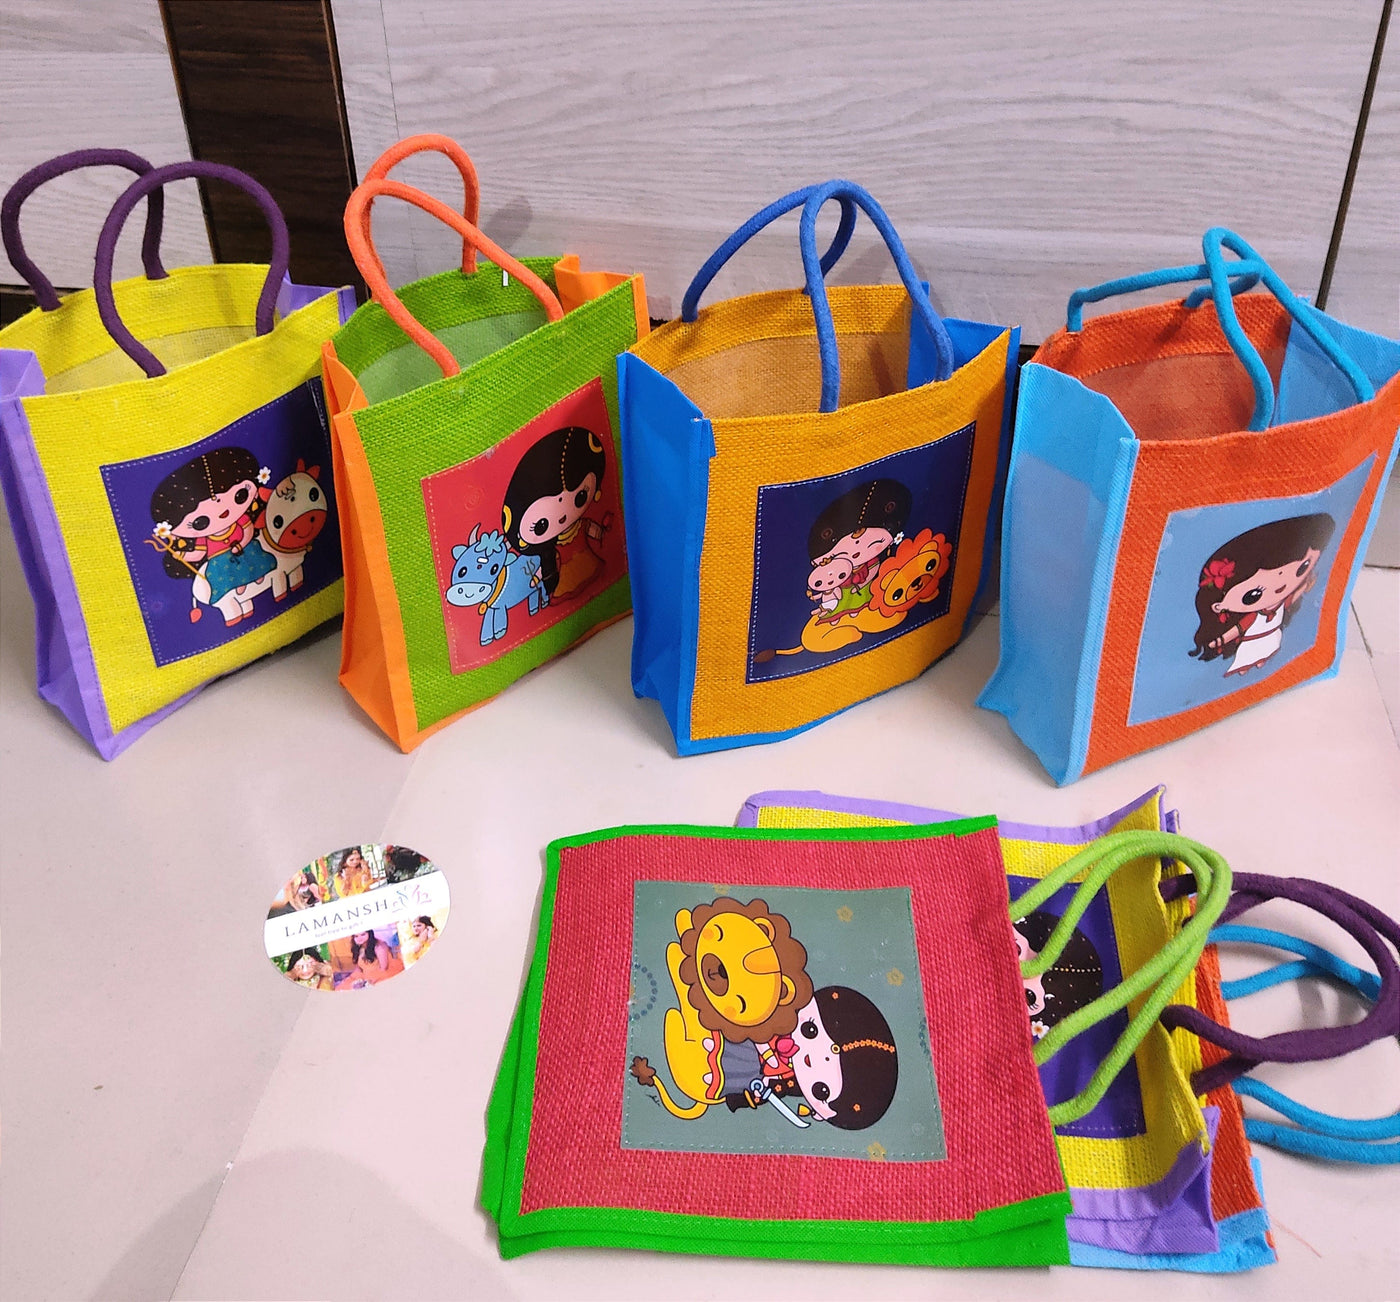 HDPE Laminated Paper Bags Manufacturer,Supplier,Exporter